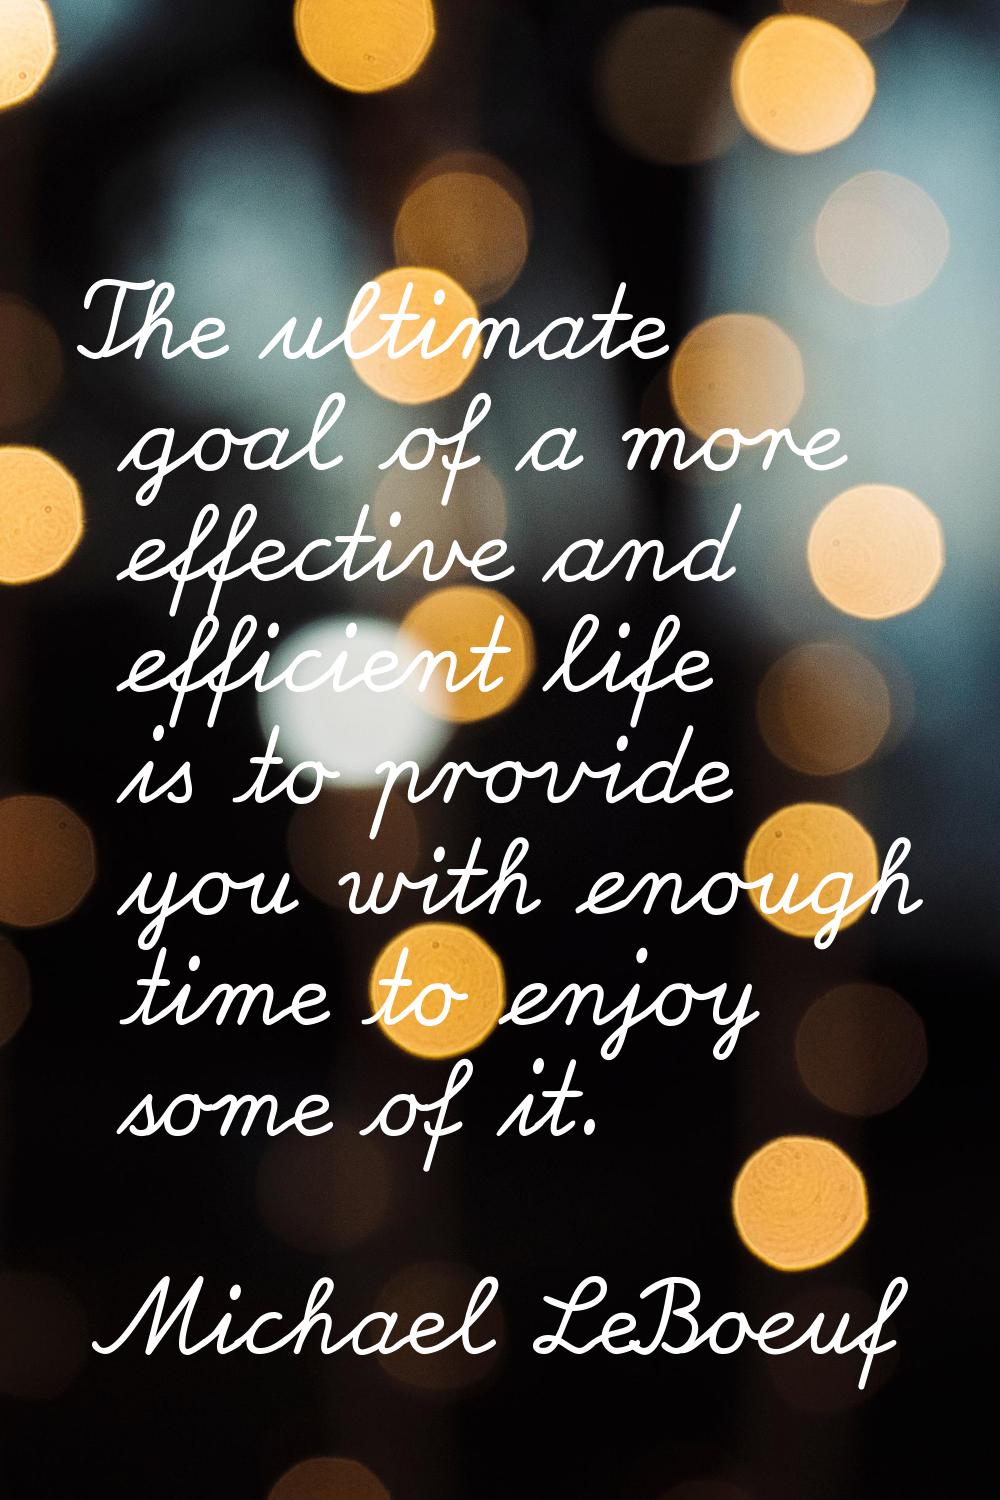 The ultimate goal of a more effective and efficient life is to provide you with enough time to enjo